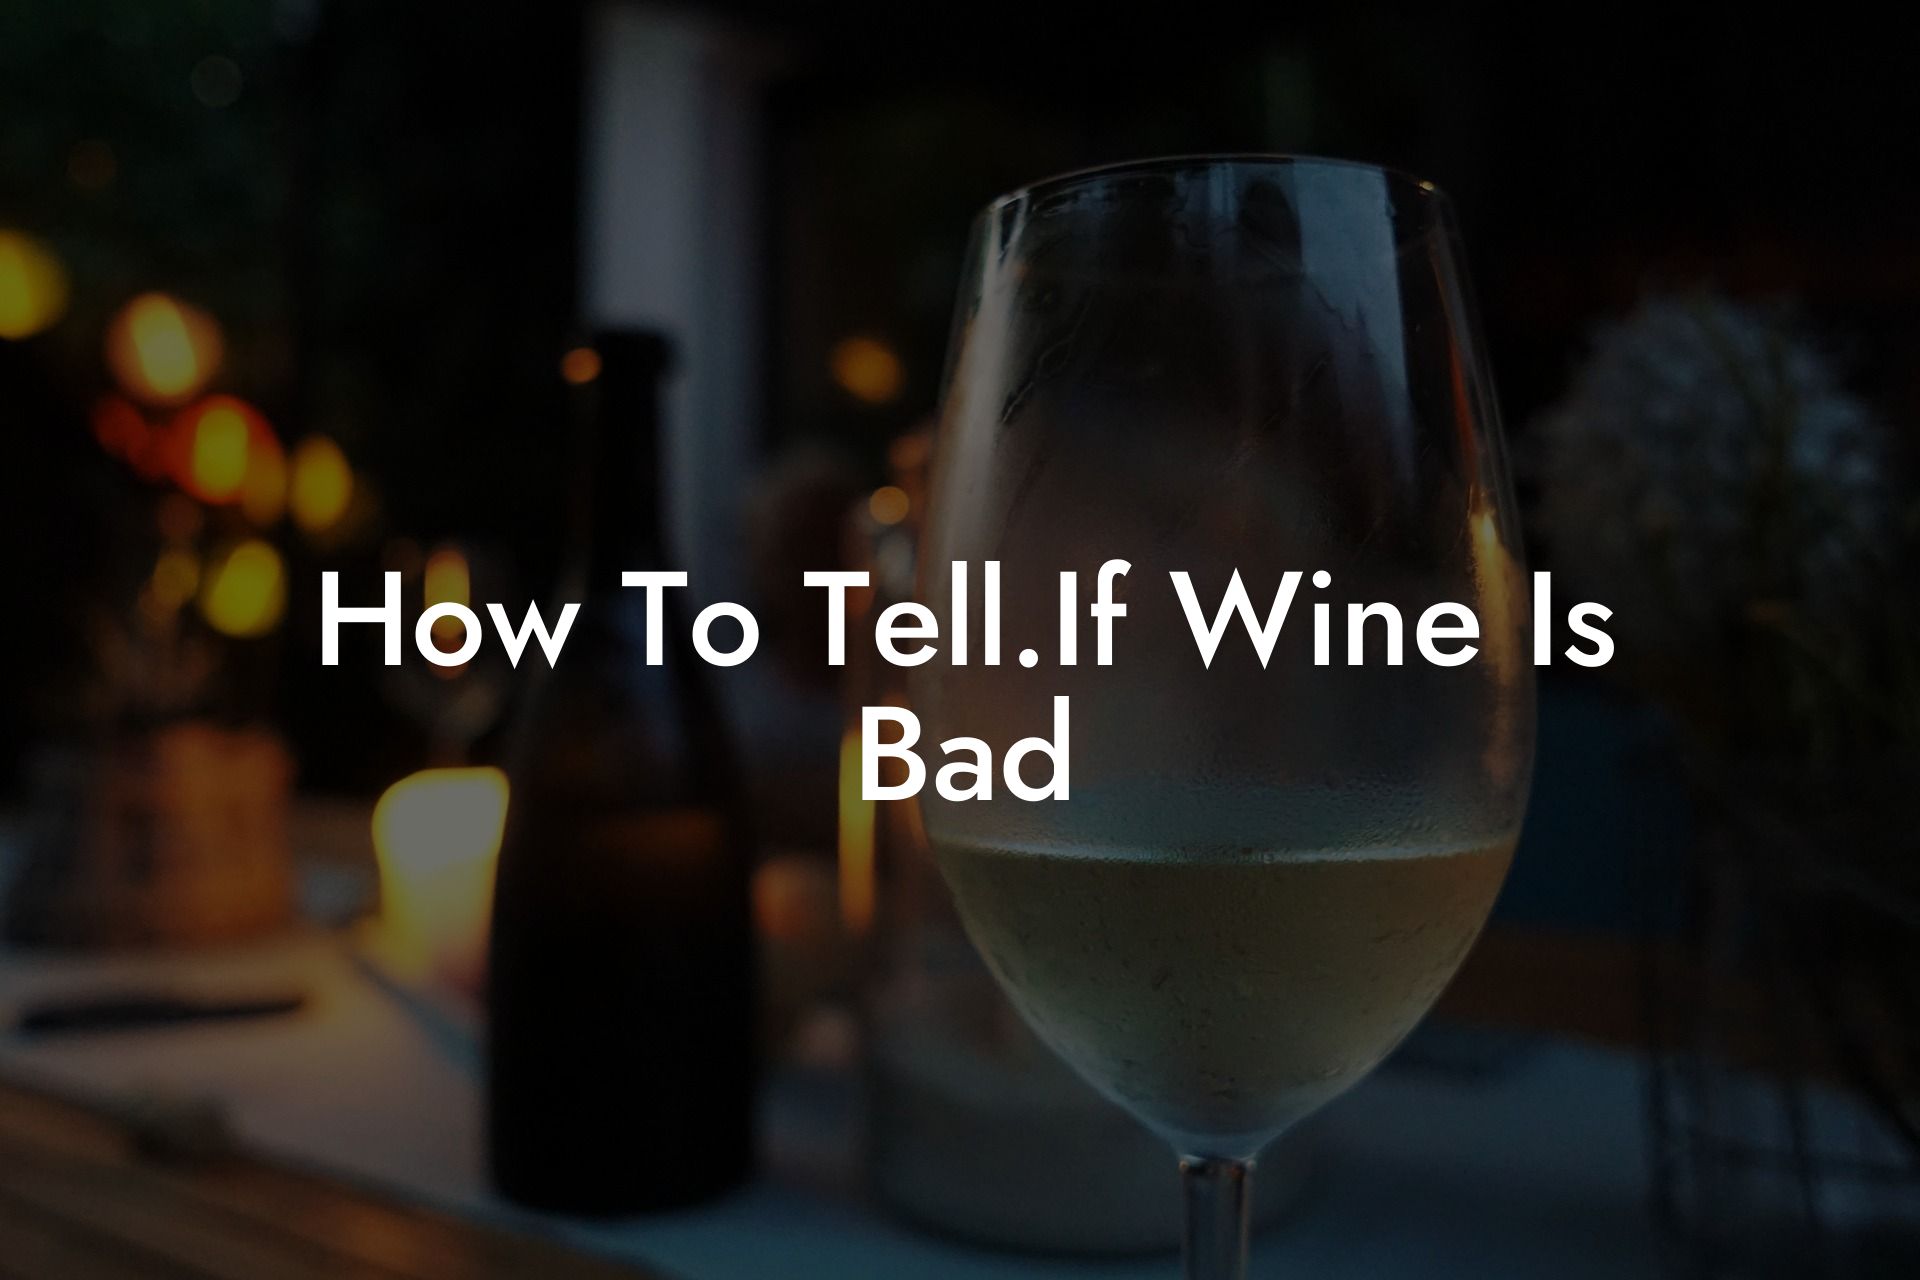 How To Tell.If Wine Is Bad